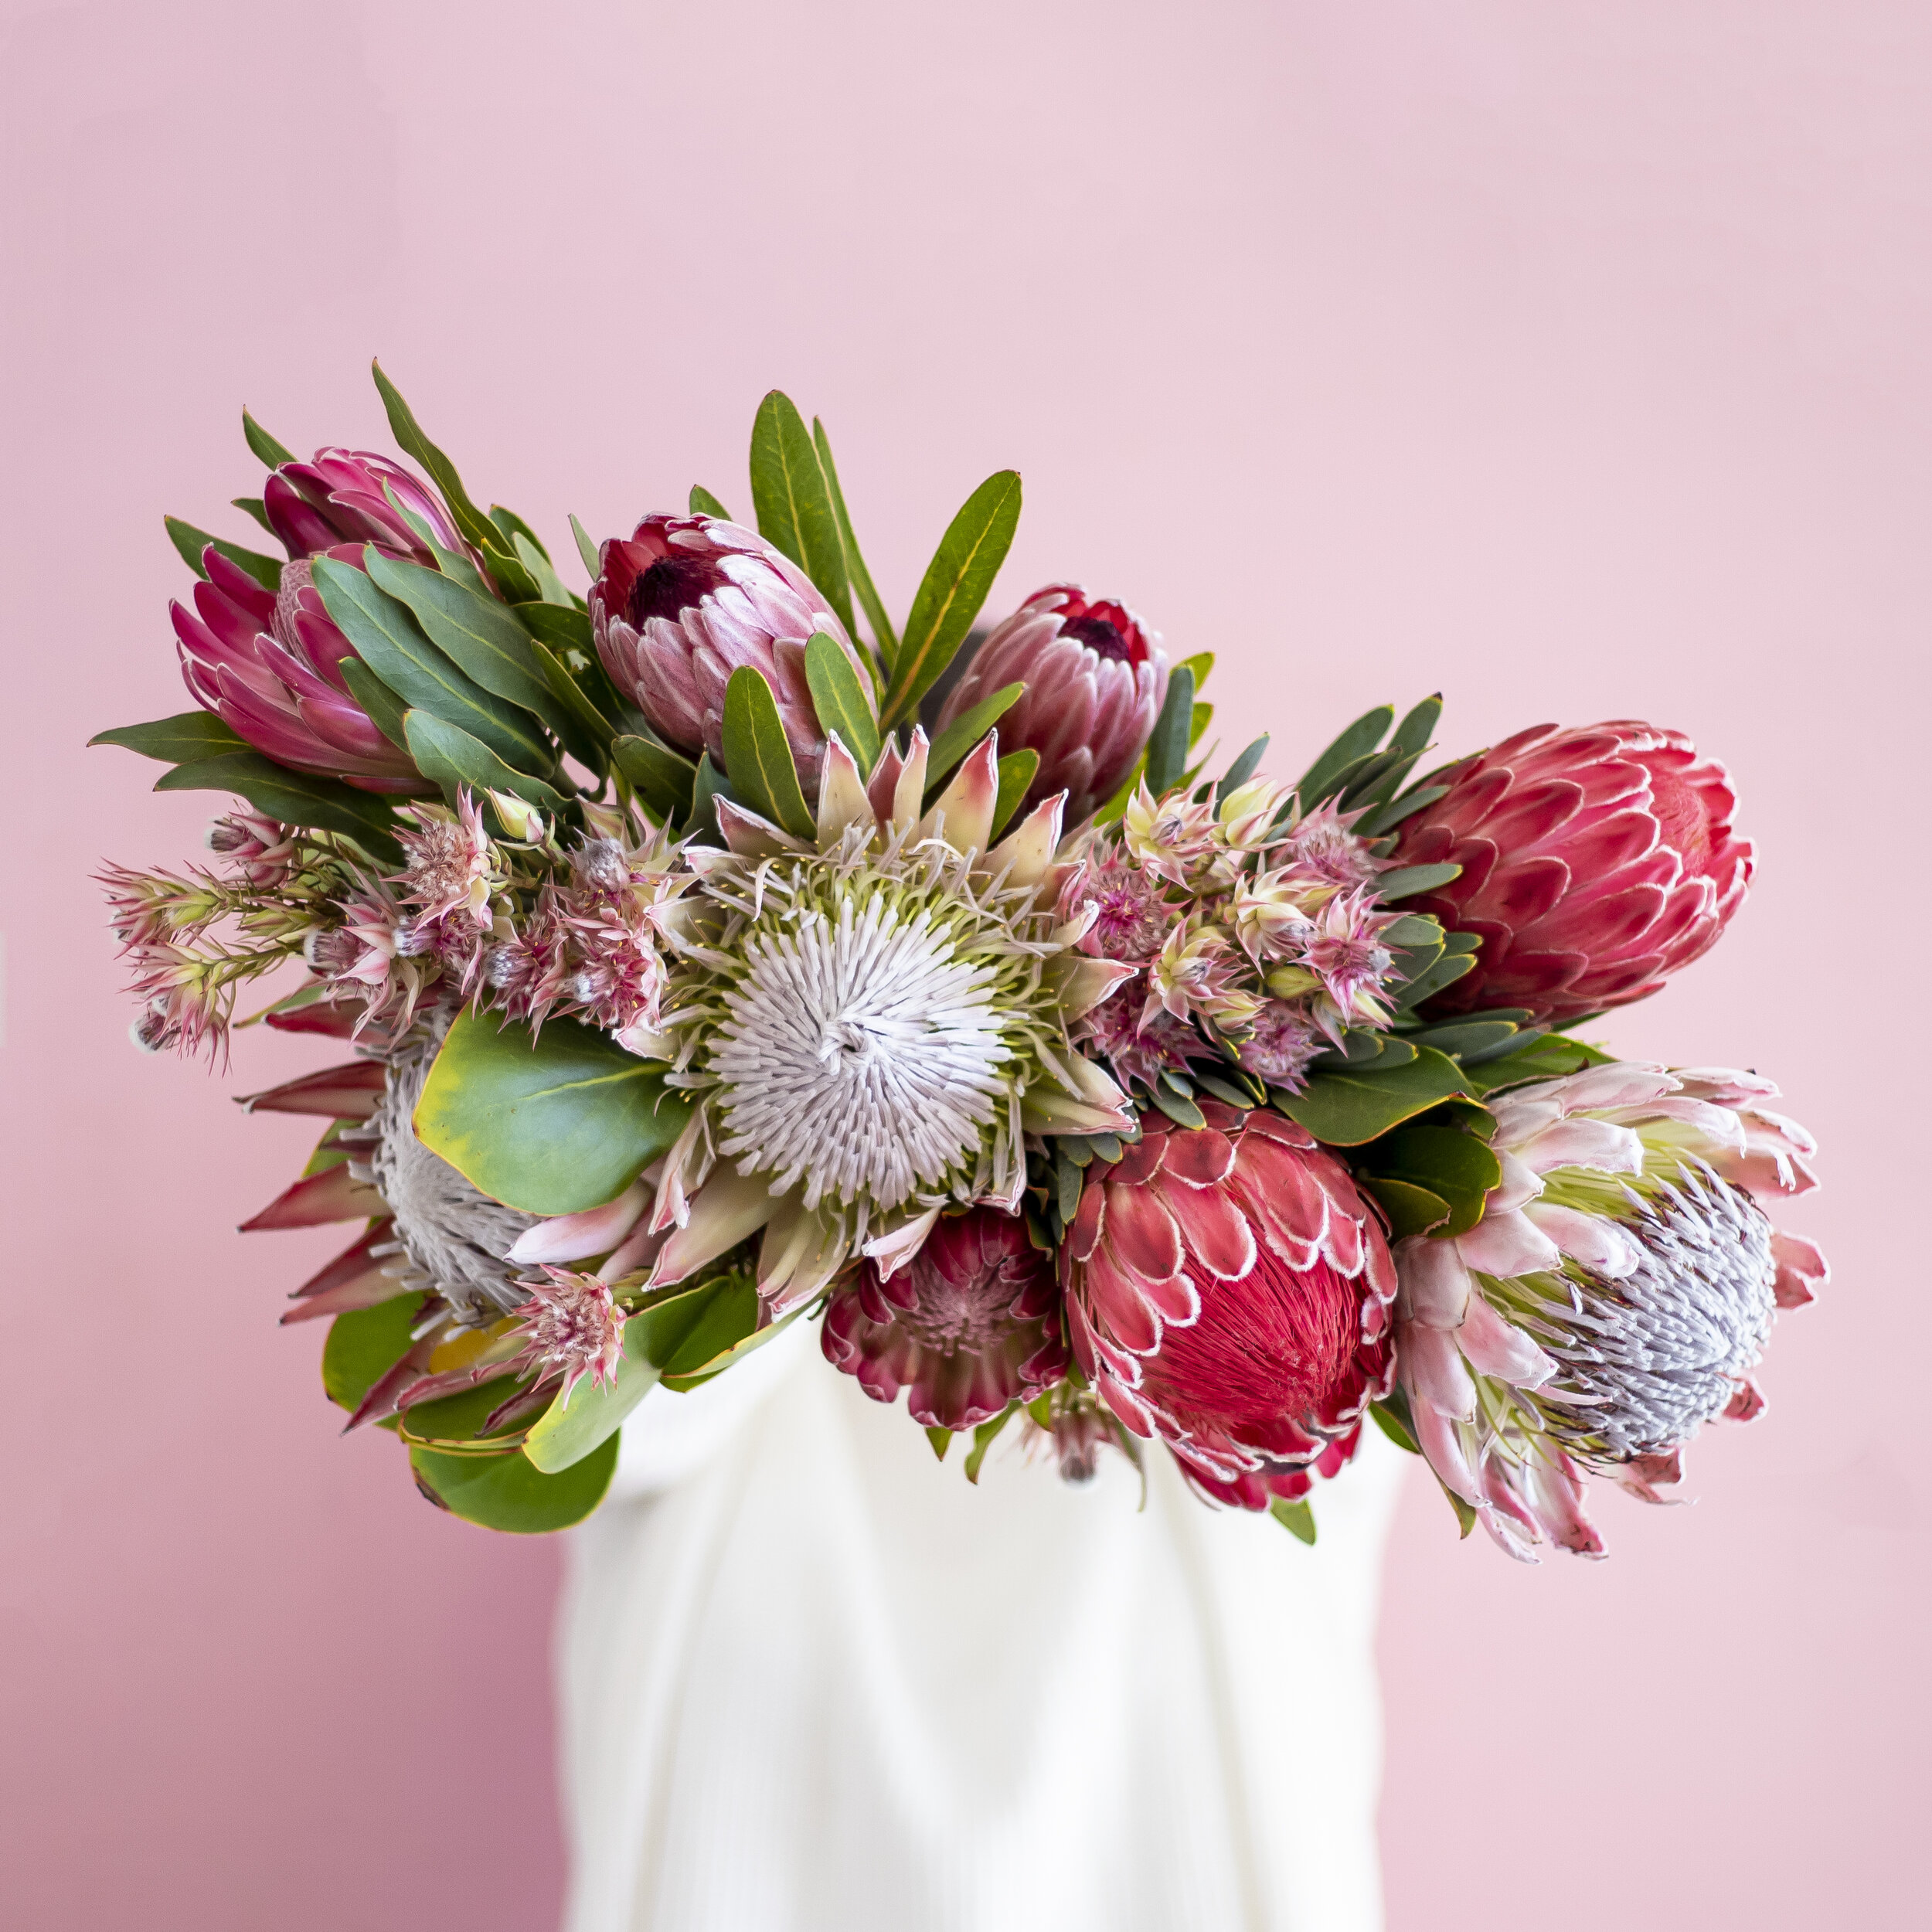 A bouquet head of pink protea flowers being held in front of a pink background